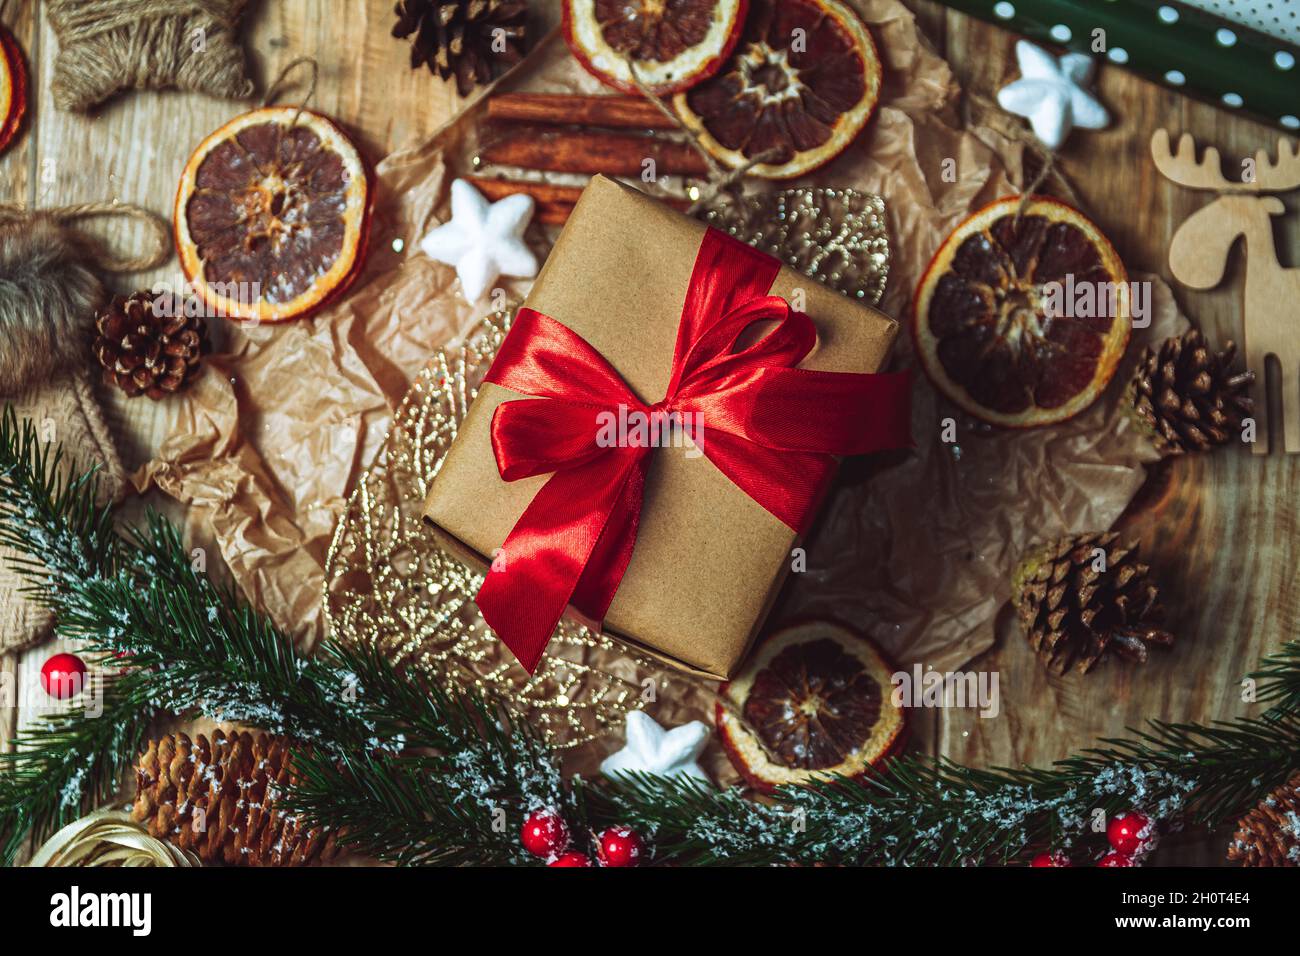 Christmas accessories and new year gift on wooden background Stock Photo